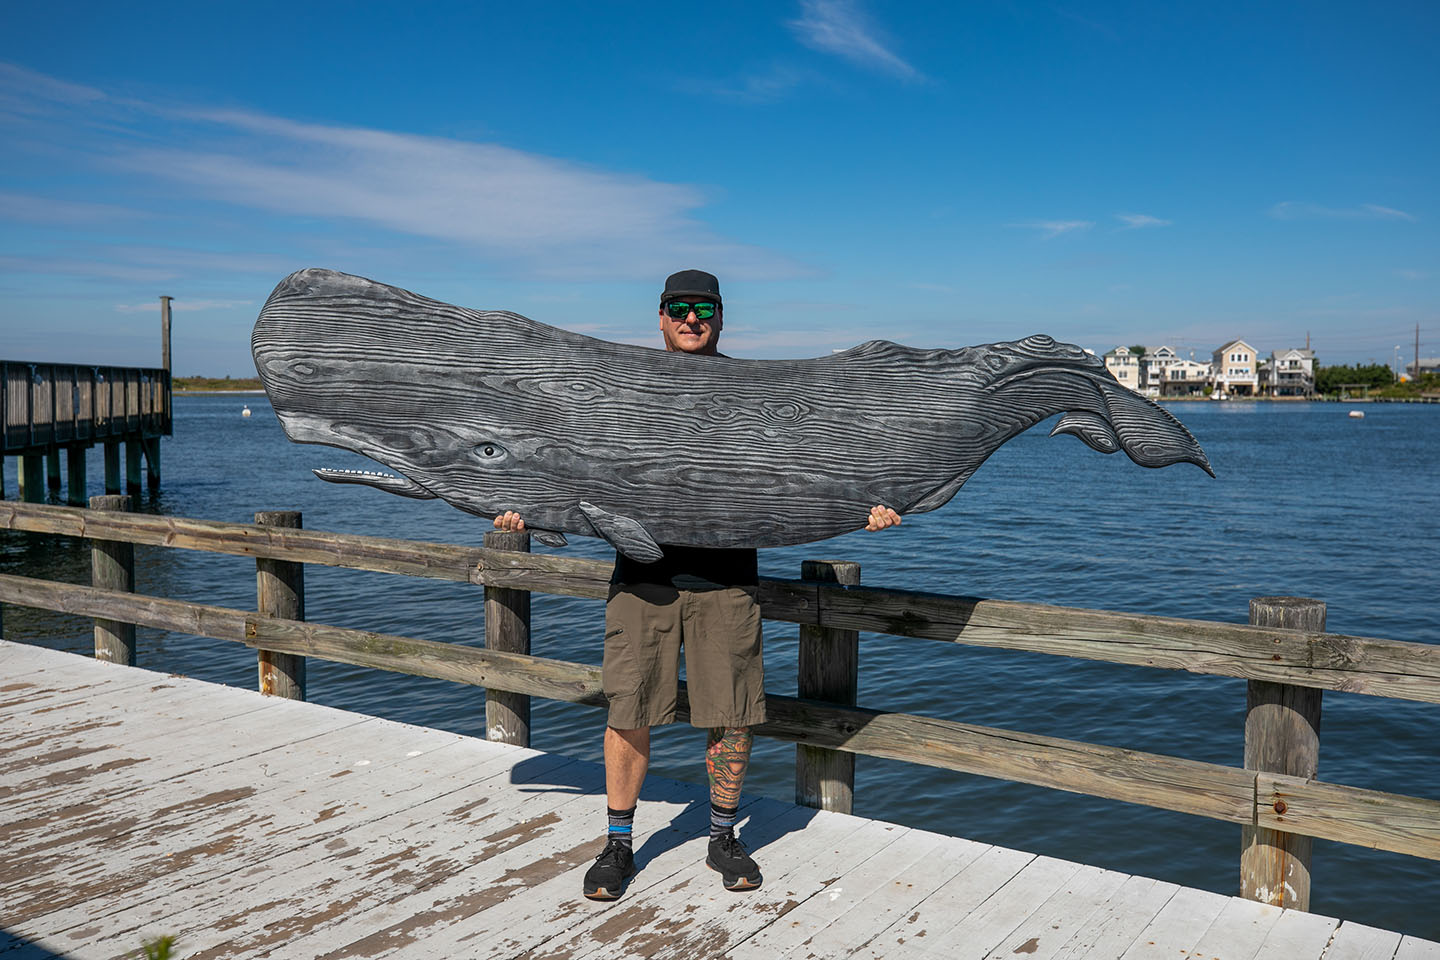 A man in a baseball hat holds a massive carved wooden whale while standing on a pier